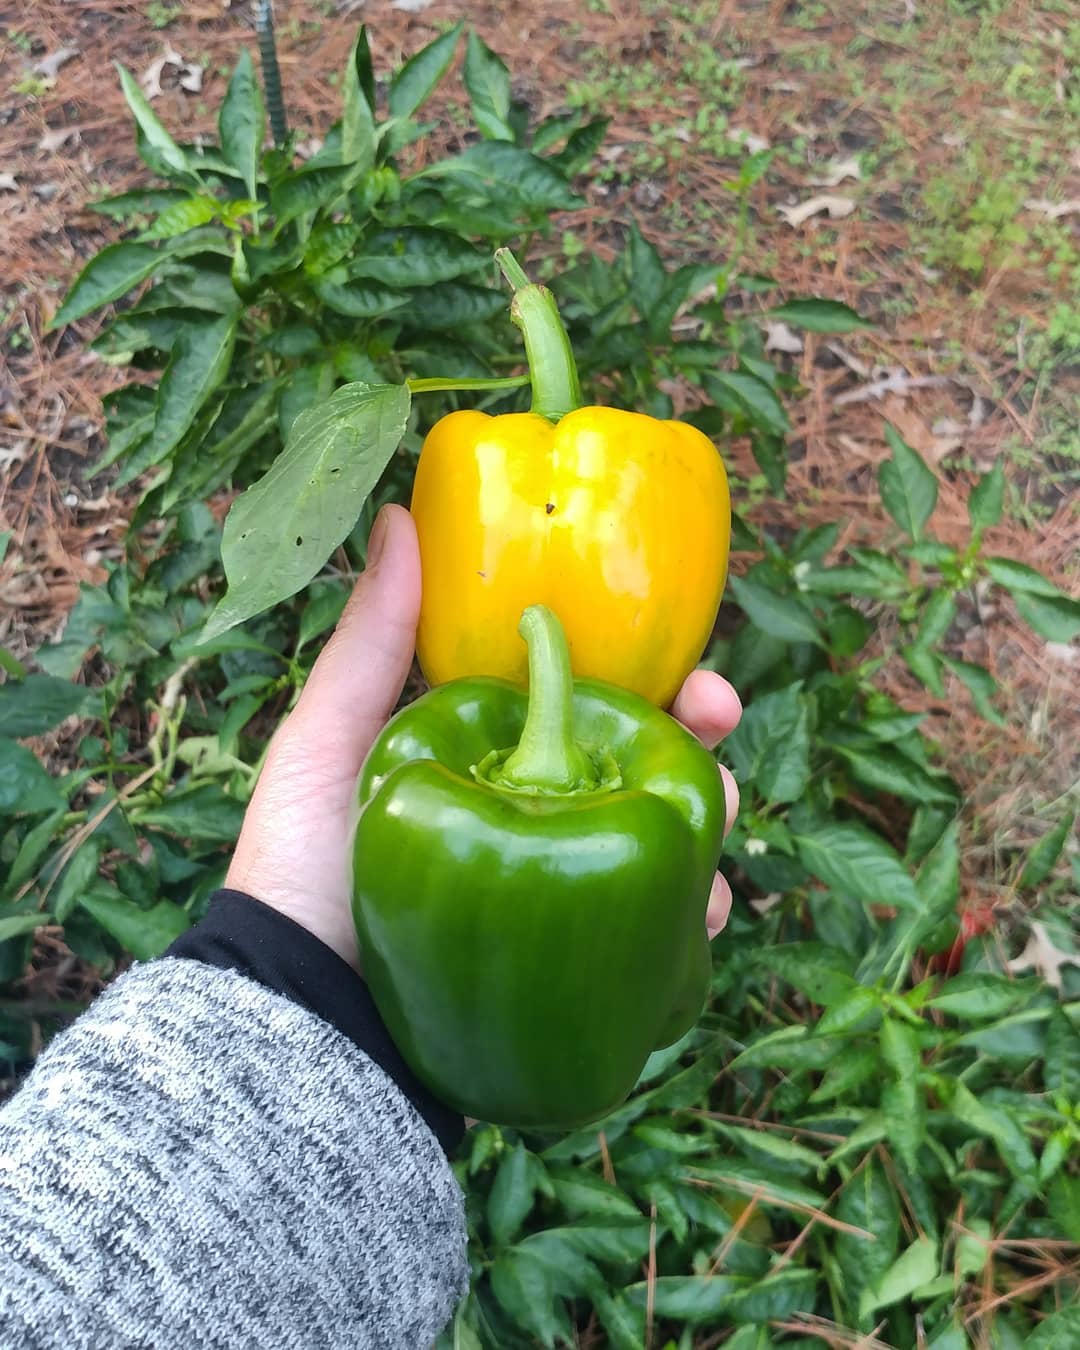 Goodbye peppers! We finally had a freeze last week and it killed off the pepper plants. The rest of the winter garden is still going strong!